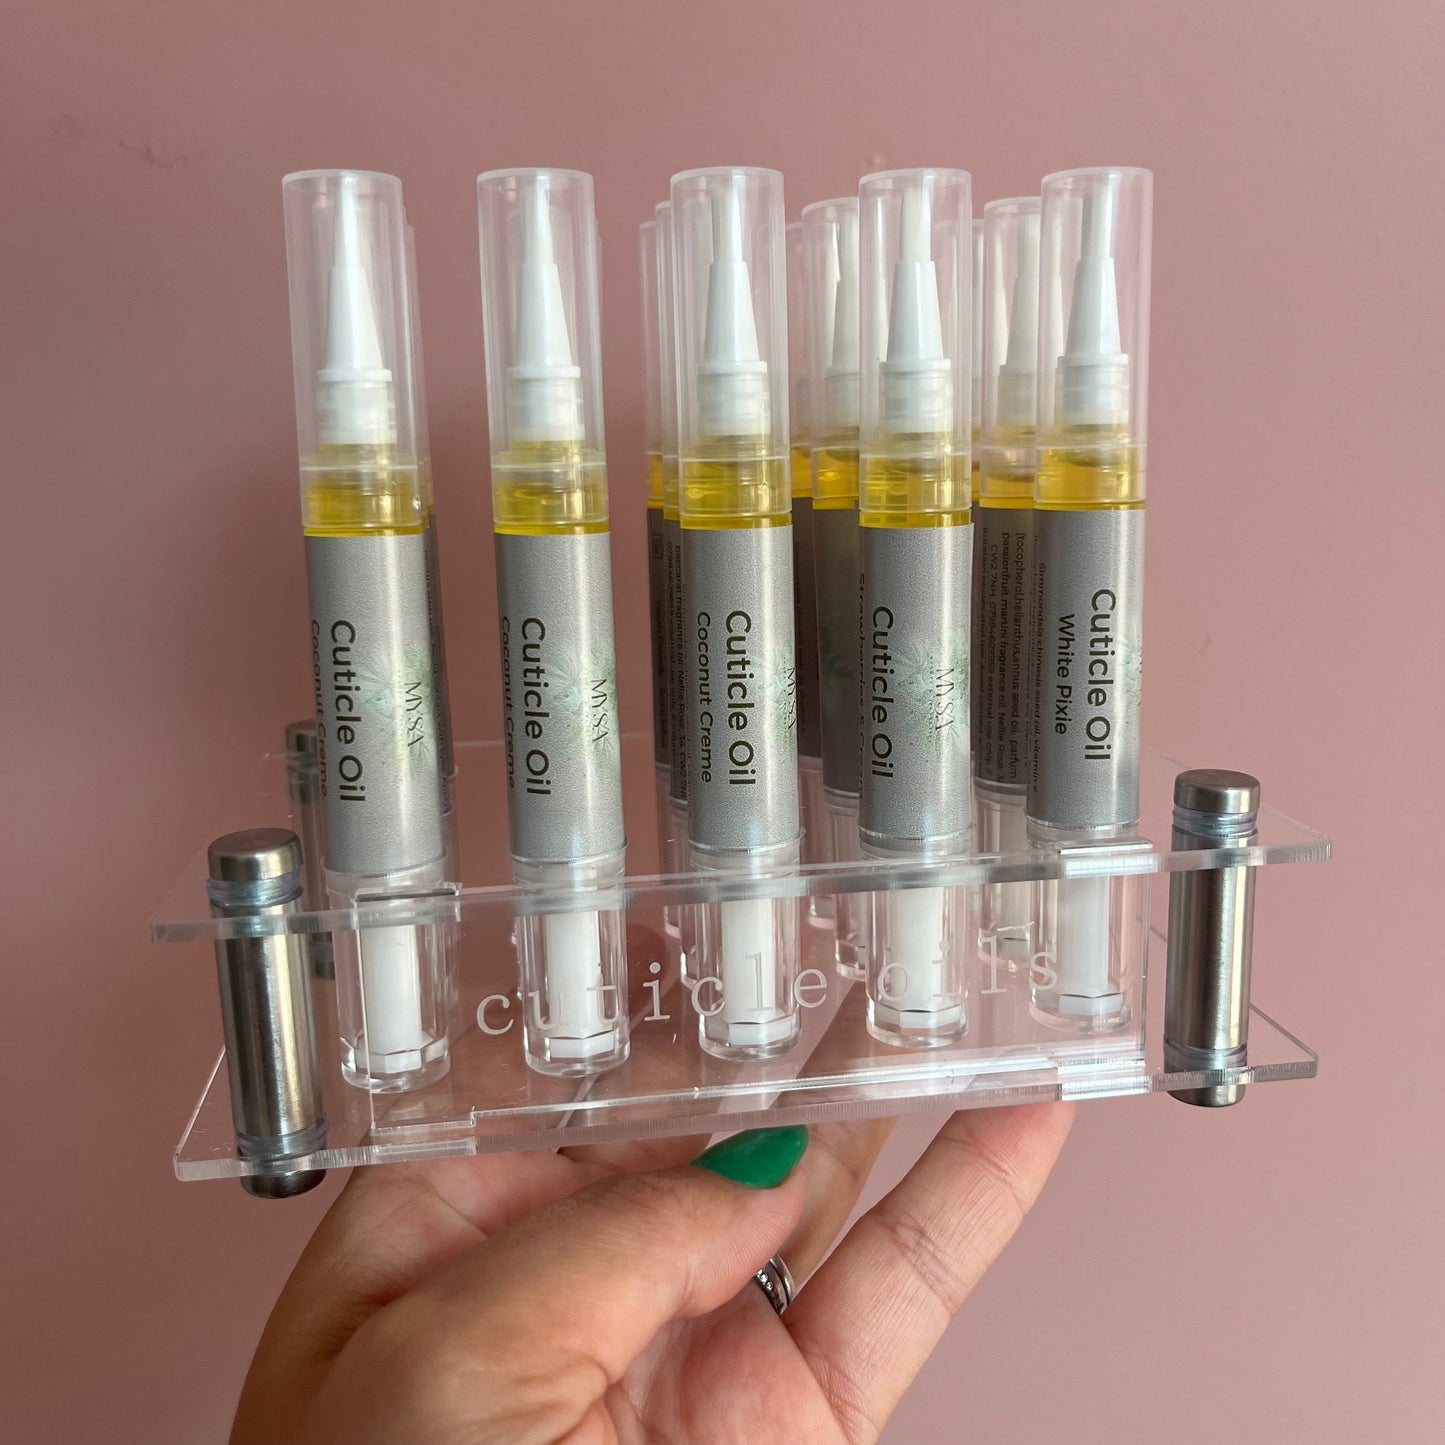 GOLD LEGS Generic Cuticle Oil Pen Stand Only (no pens included.